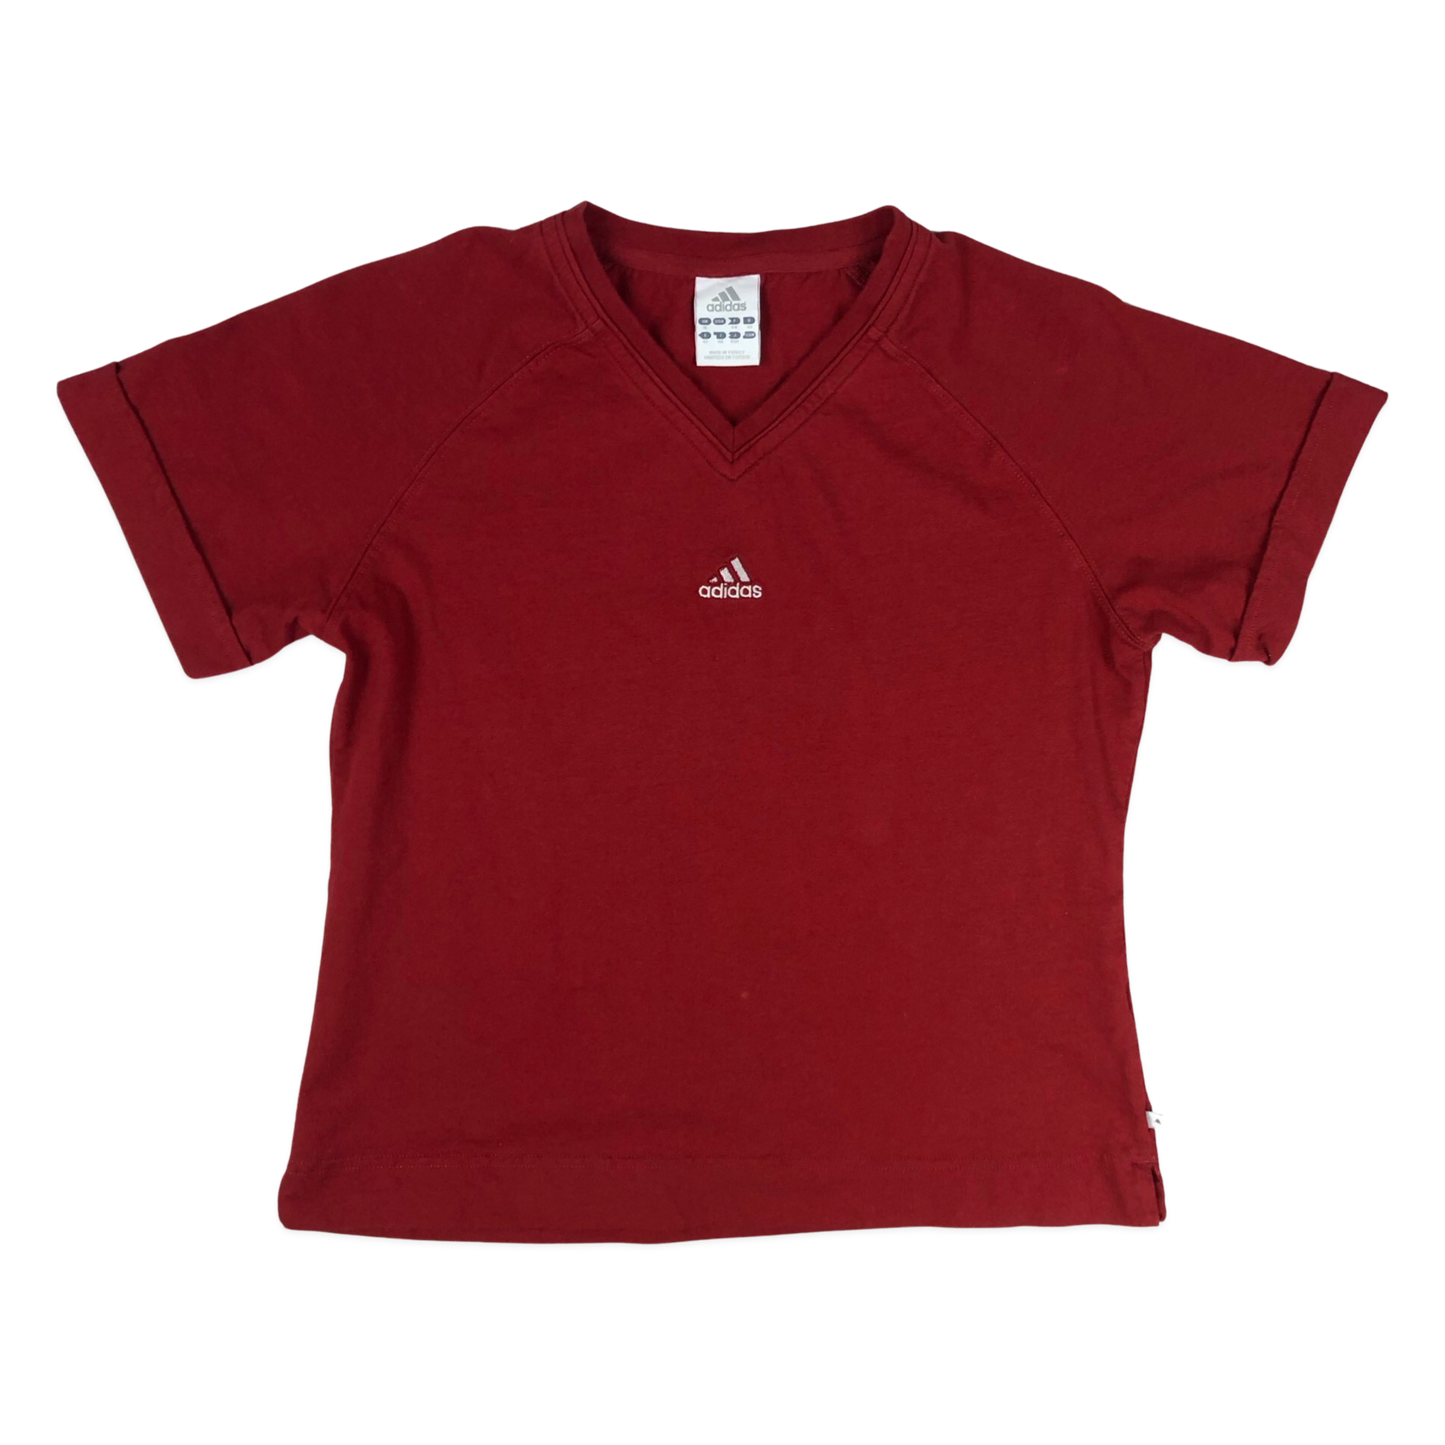 Vintage 00s Adidas Red Baby Tee 12 14